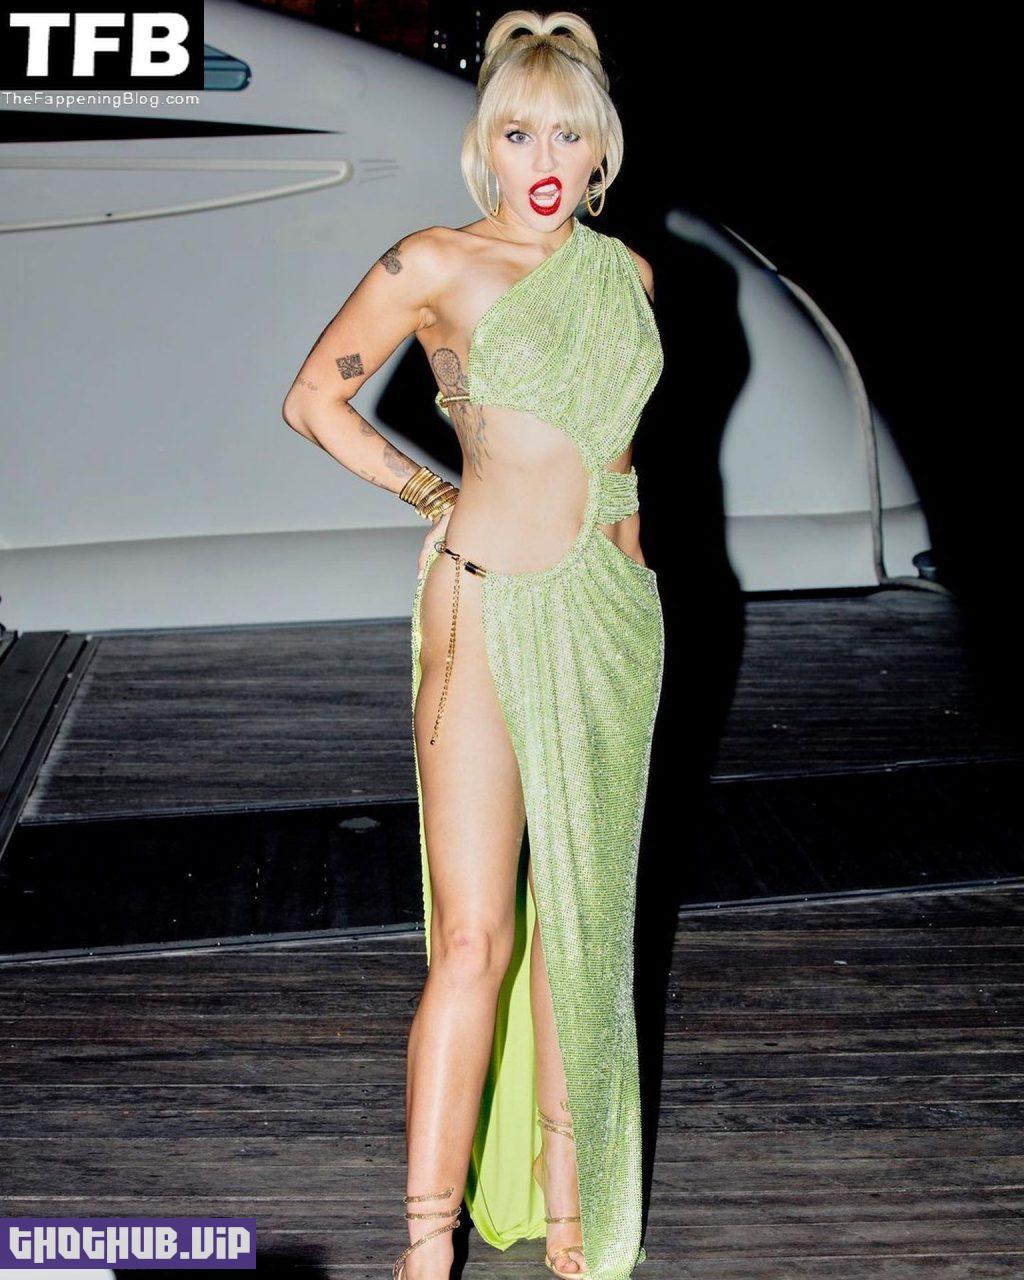 Miley Cyrus Pantyless in Sexy Dress 5 thefappeningblog.com